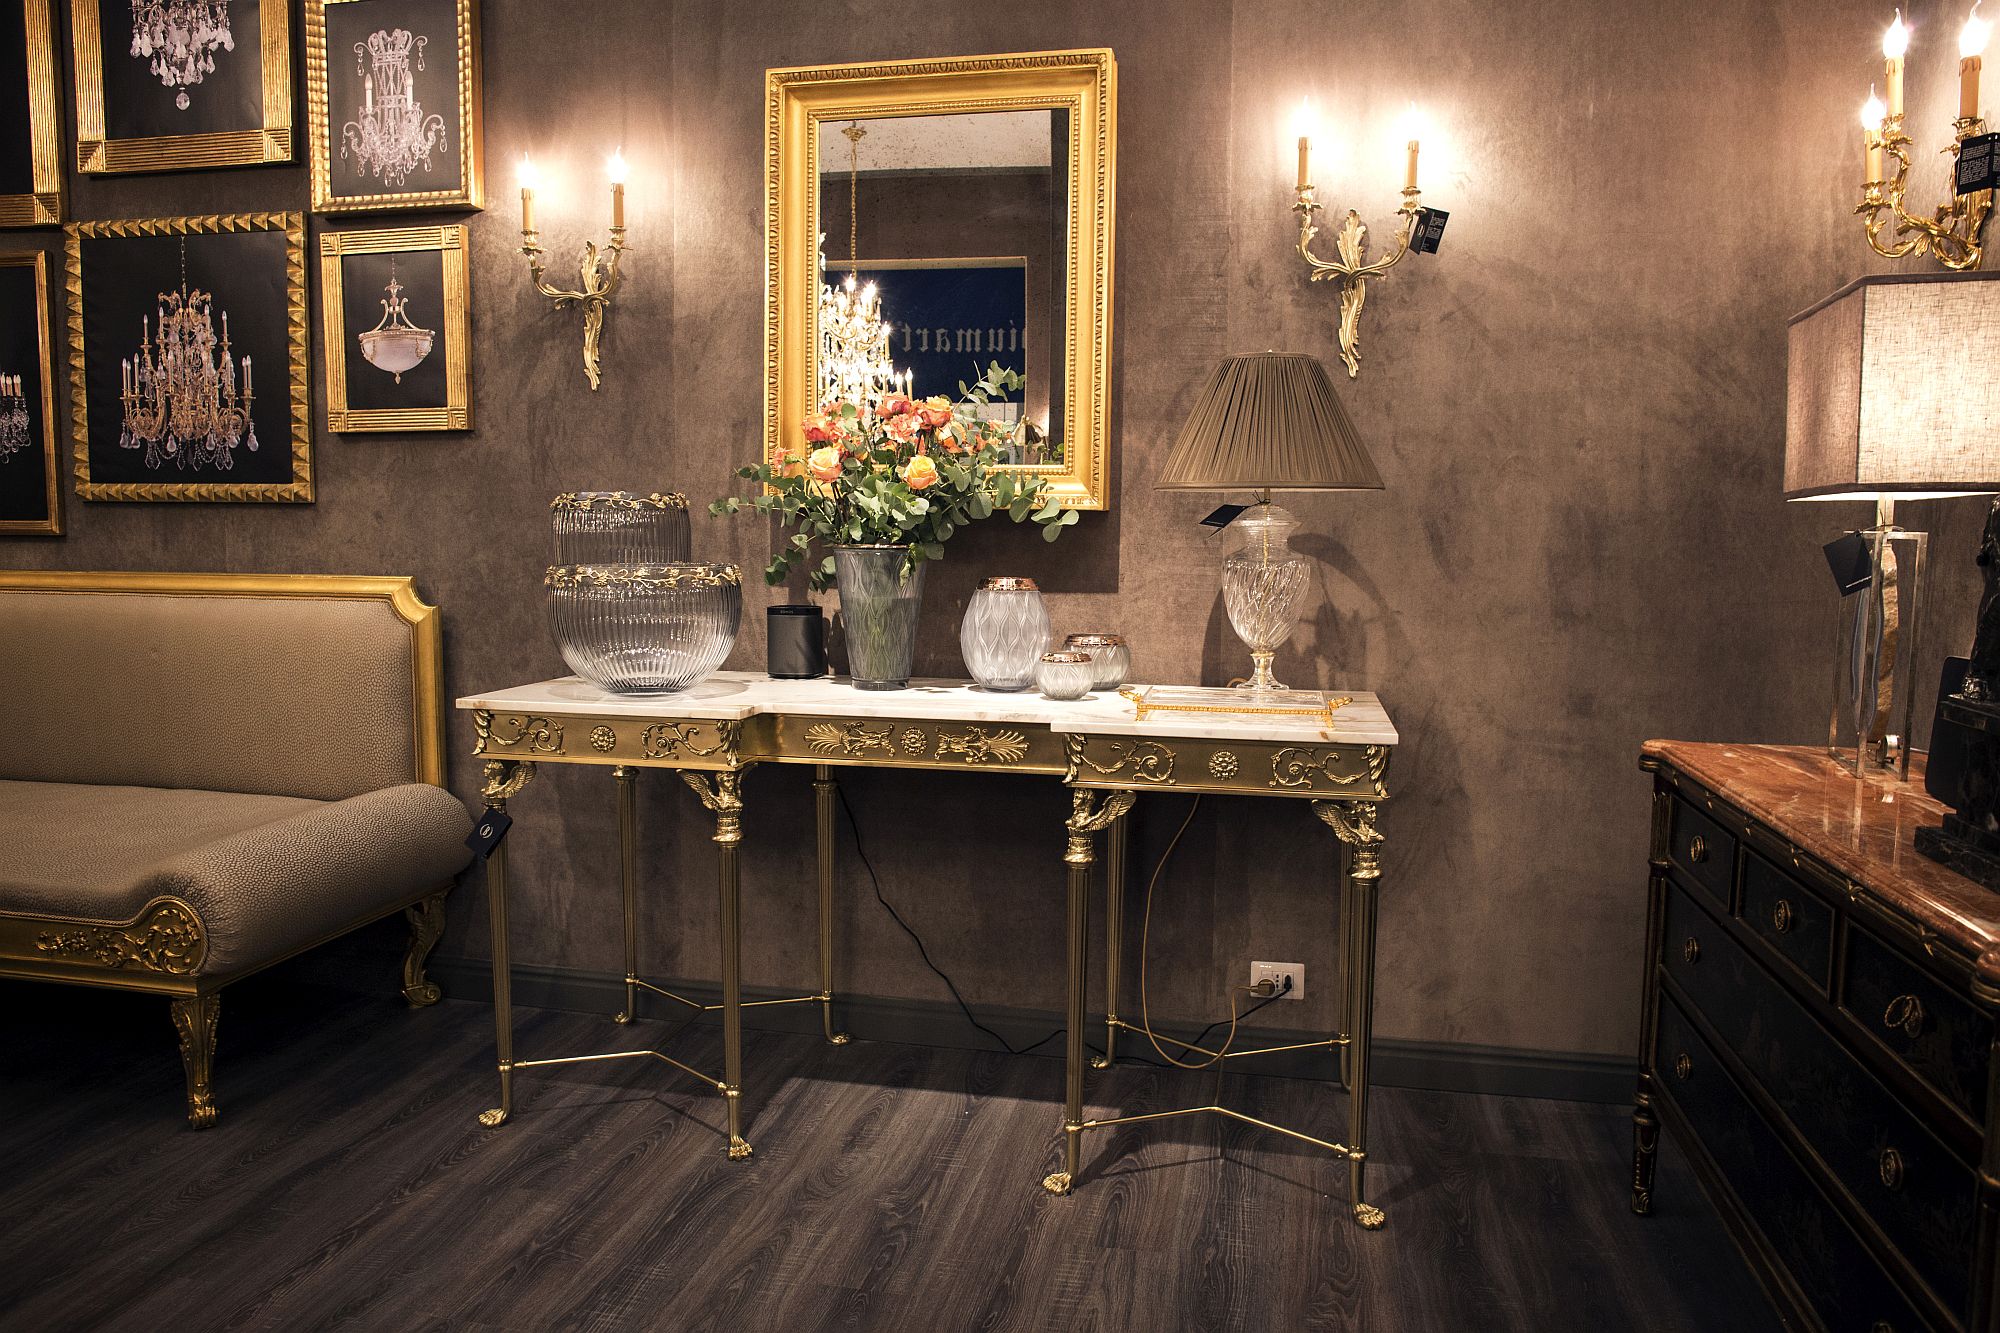 Gold-mirror-frame-brings-sparkle-and-style-to-the-retro-style-interior